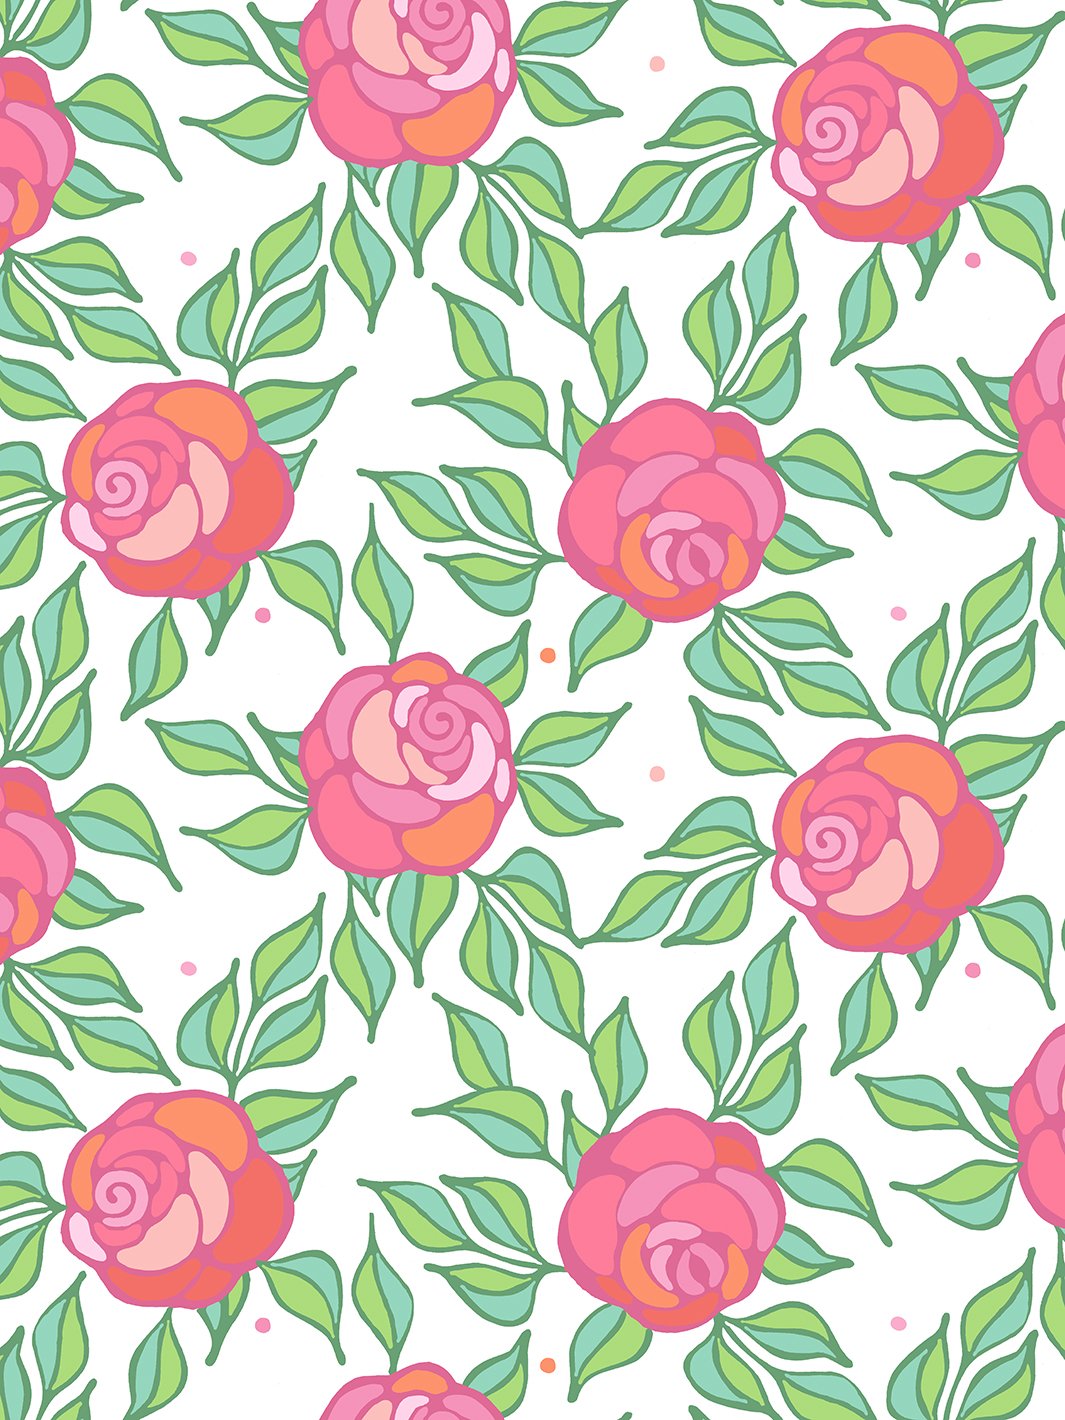 'Groovy Floral' Wallpaper by Barbie™ - Berry